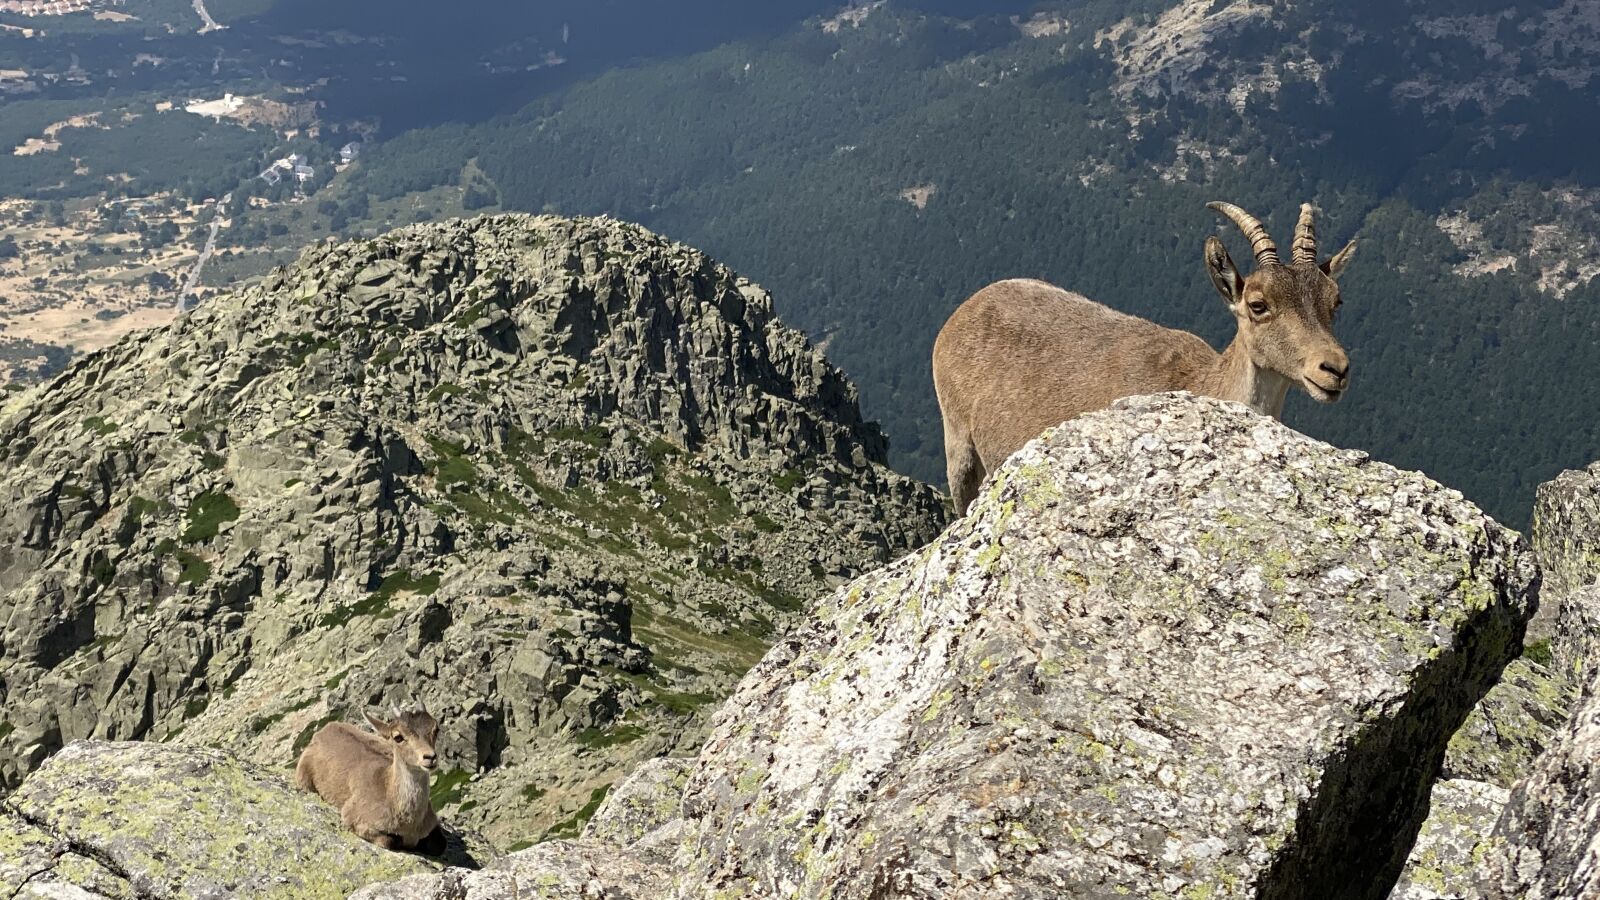 Apple iPhone 11 Pro Max + iPhone 11 Pro Max back triple camera 6mm f/2 sample photo. Mountains, goat, rocks photography